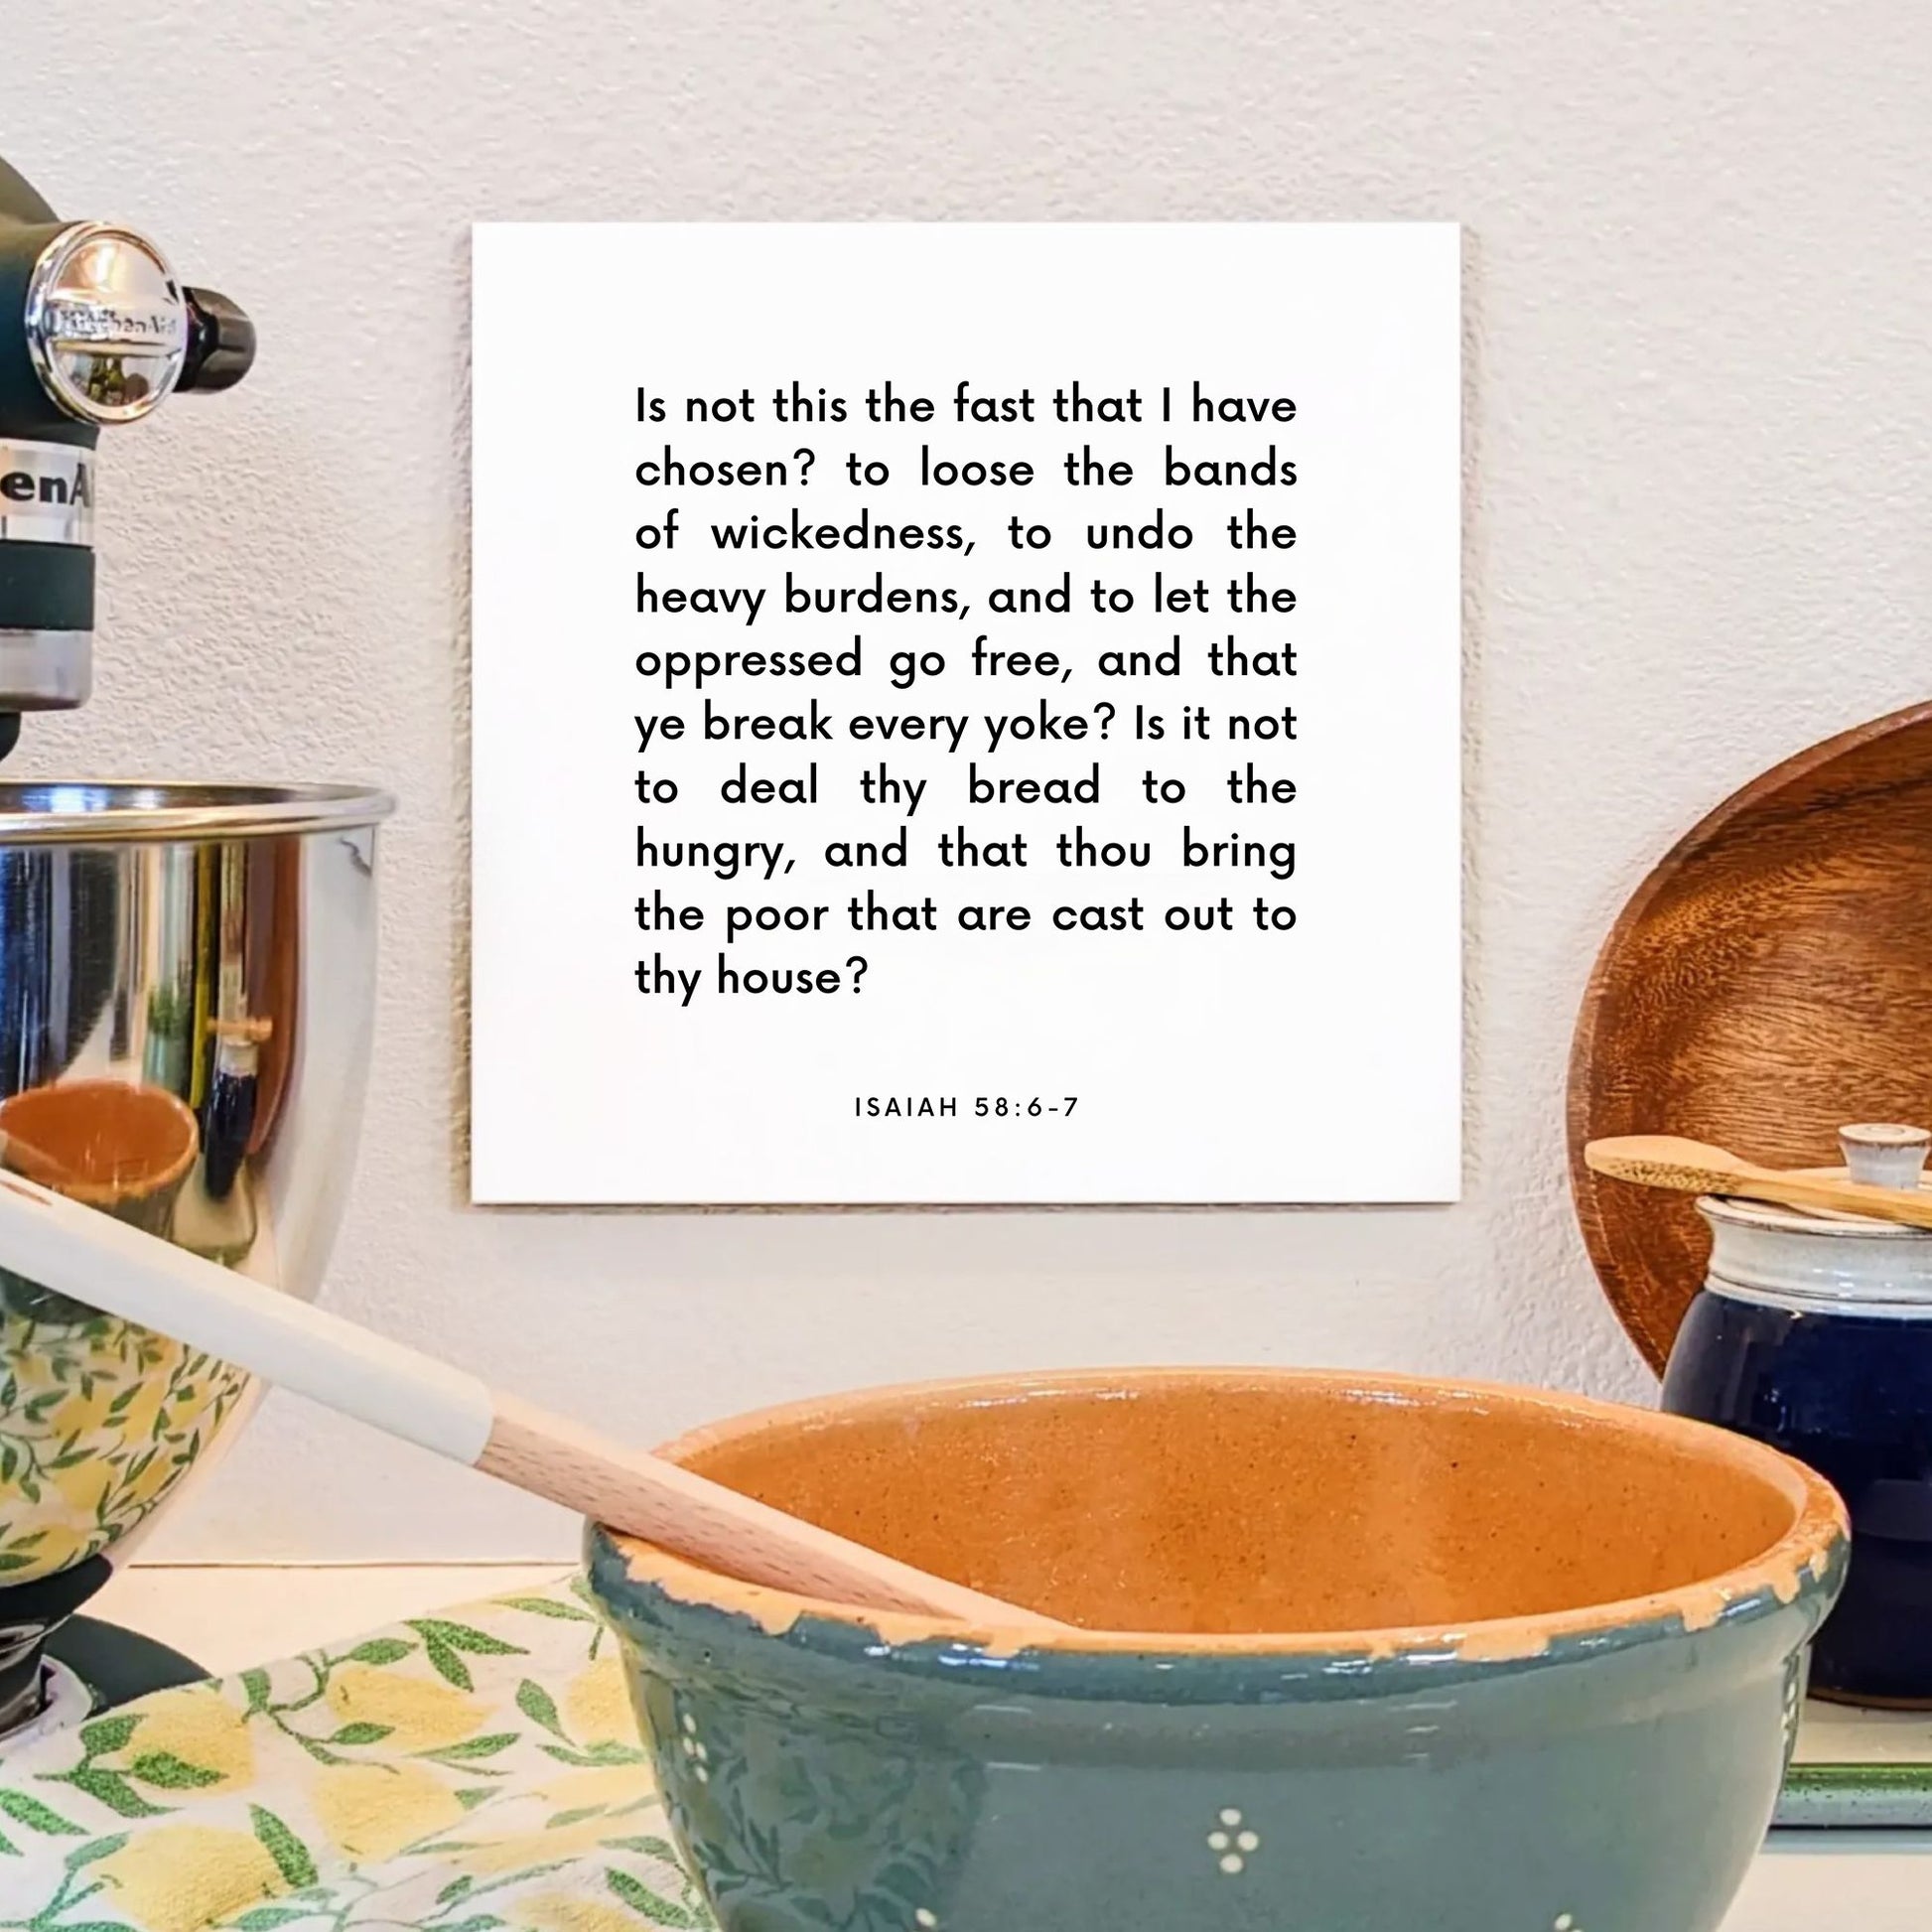 Kitchen mouting of the scripture tile for Isaiah 58:6-7 - "Is not this the fast that I have chosen?"